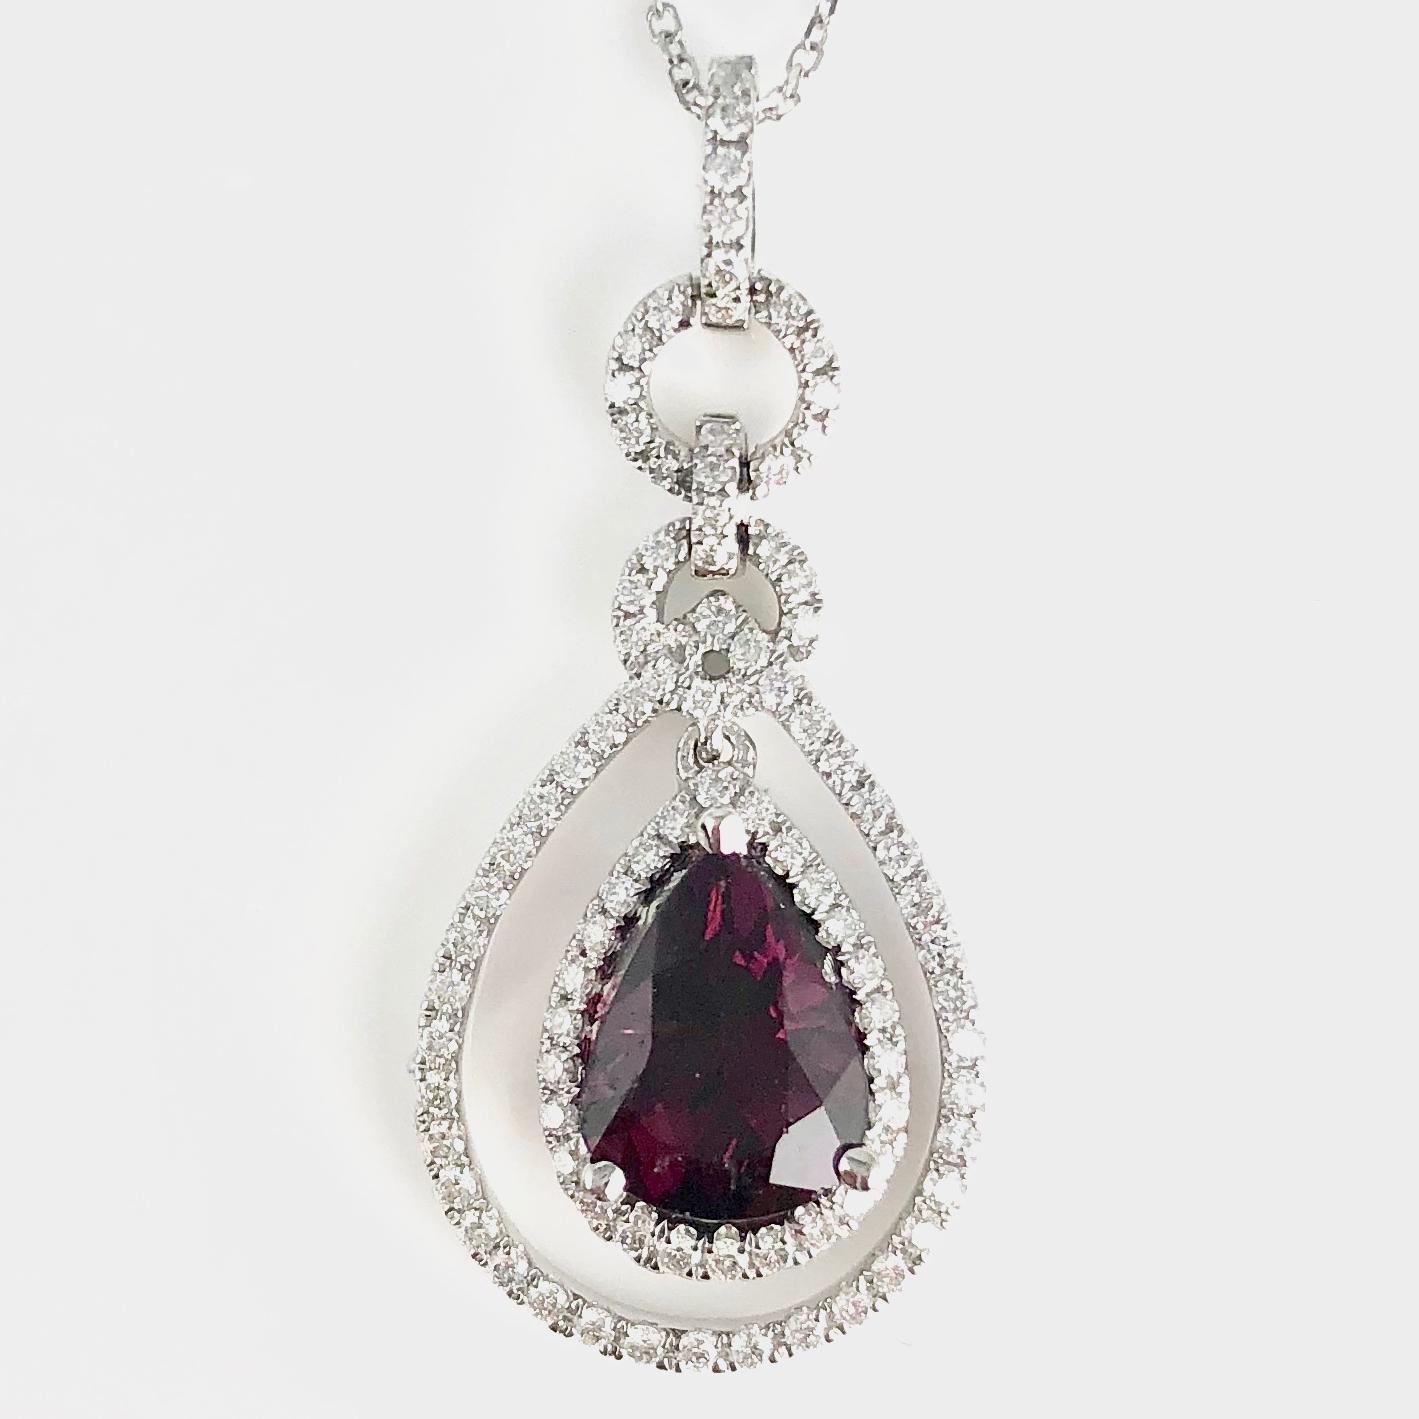 Indulge in the allure of our exquisite sweet pendant, a true masterpiece crafted just for you. Nestled at its heart is a mesmerizing 1.91 carat pear-shaped raspberry garnet, radiating with a rich, enchanting hue. 

This captivating gem is embraced